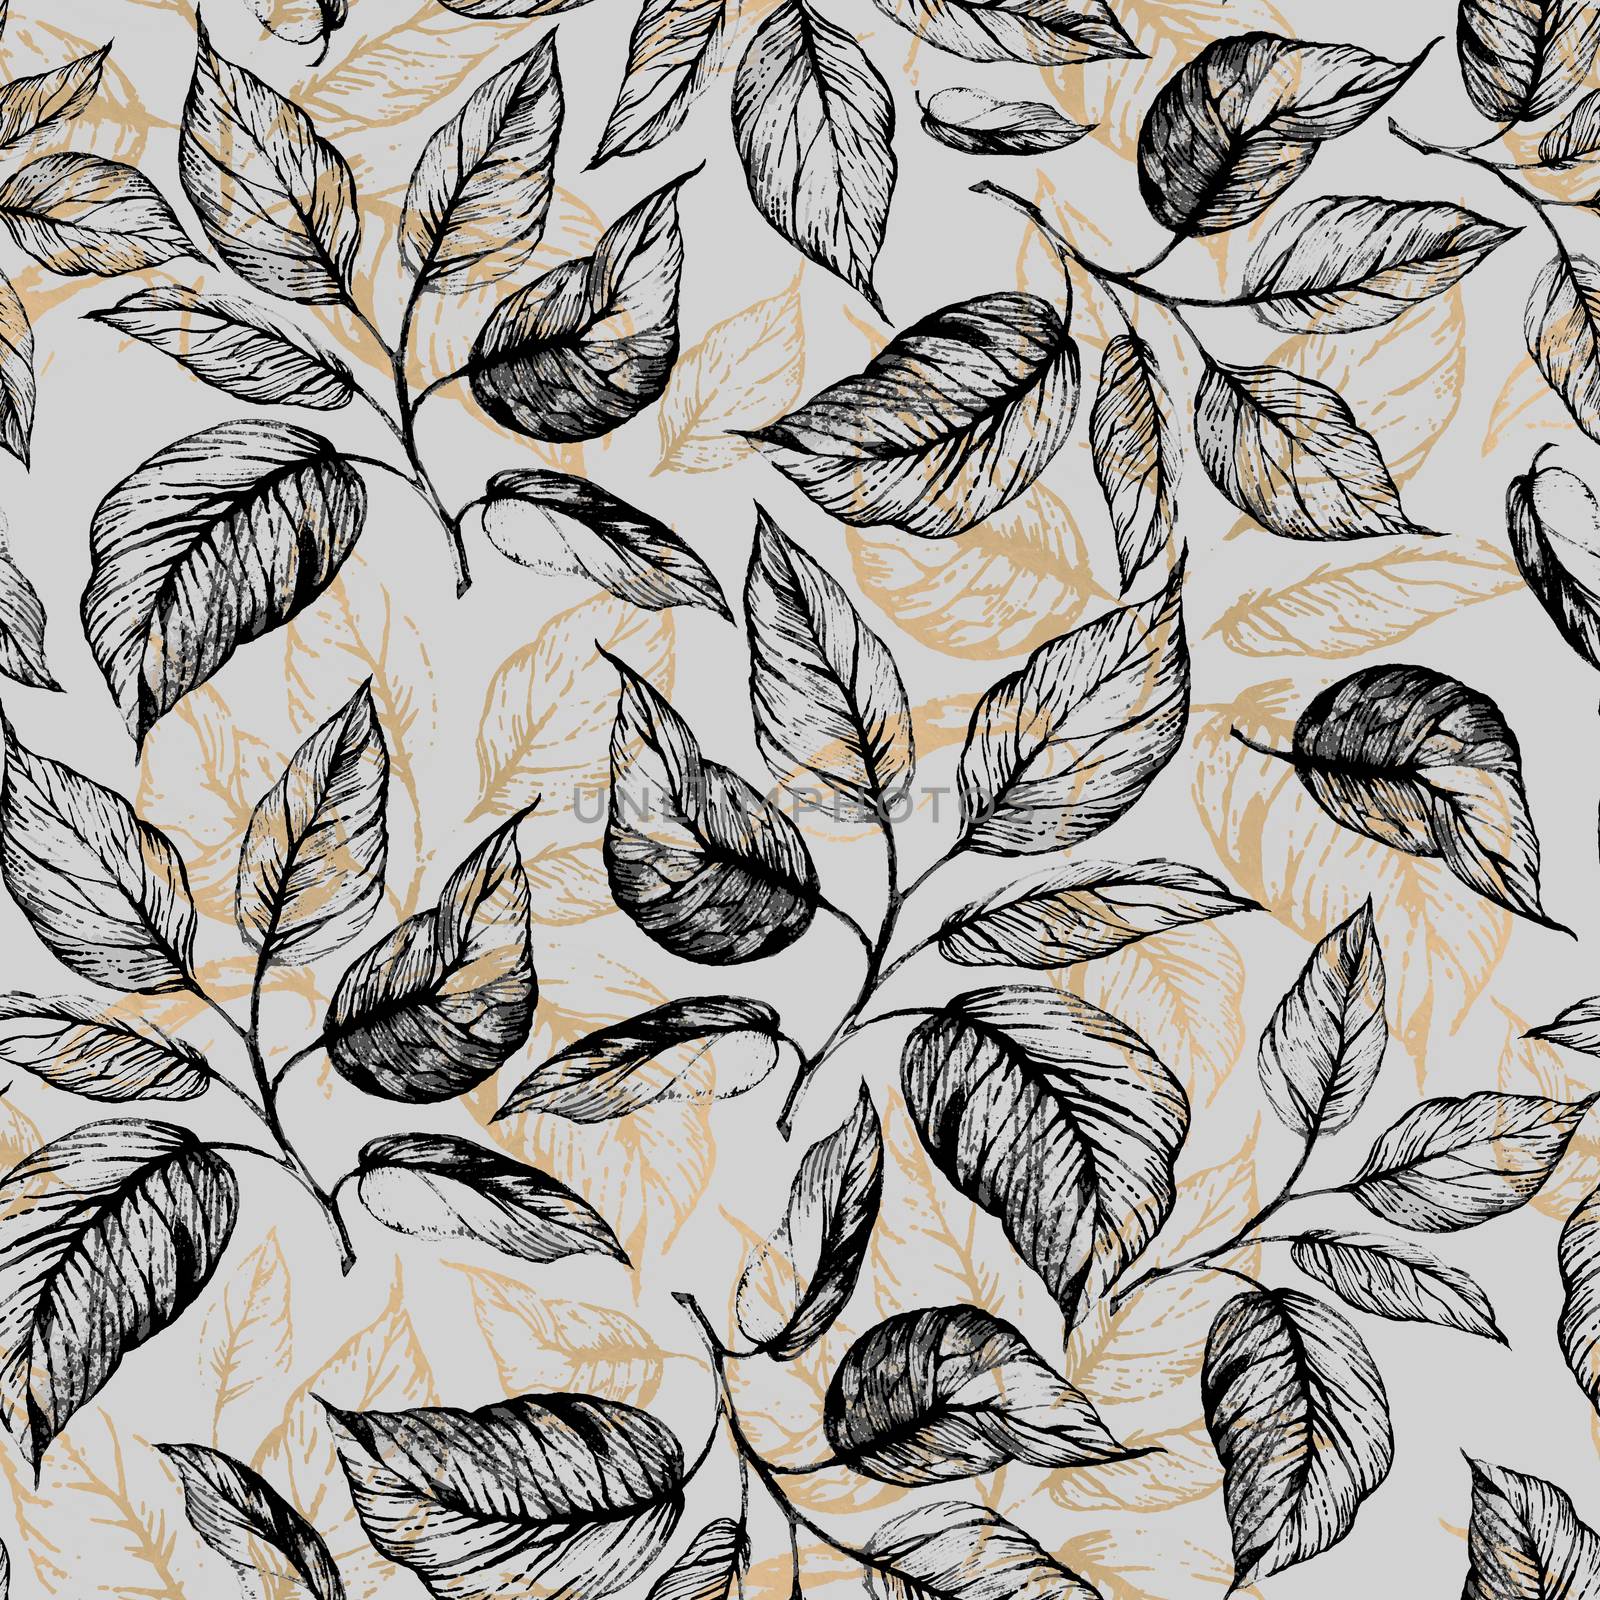 Seamless pattern - Hand drawn twig with leaves in gray scale and leaves contour of golden foil on grey background. Design for wallpaper, textile, fabric, bookend, wrapping.